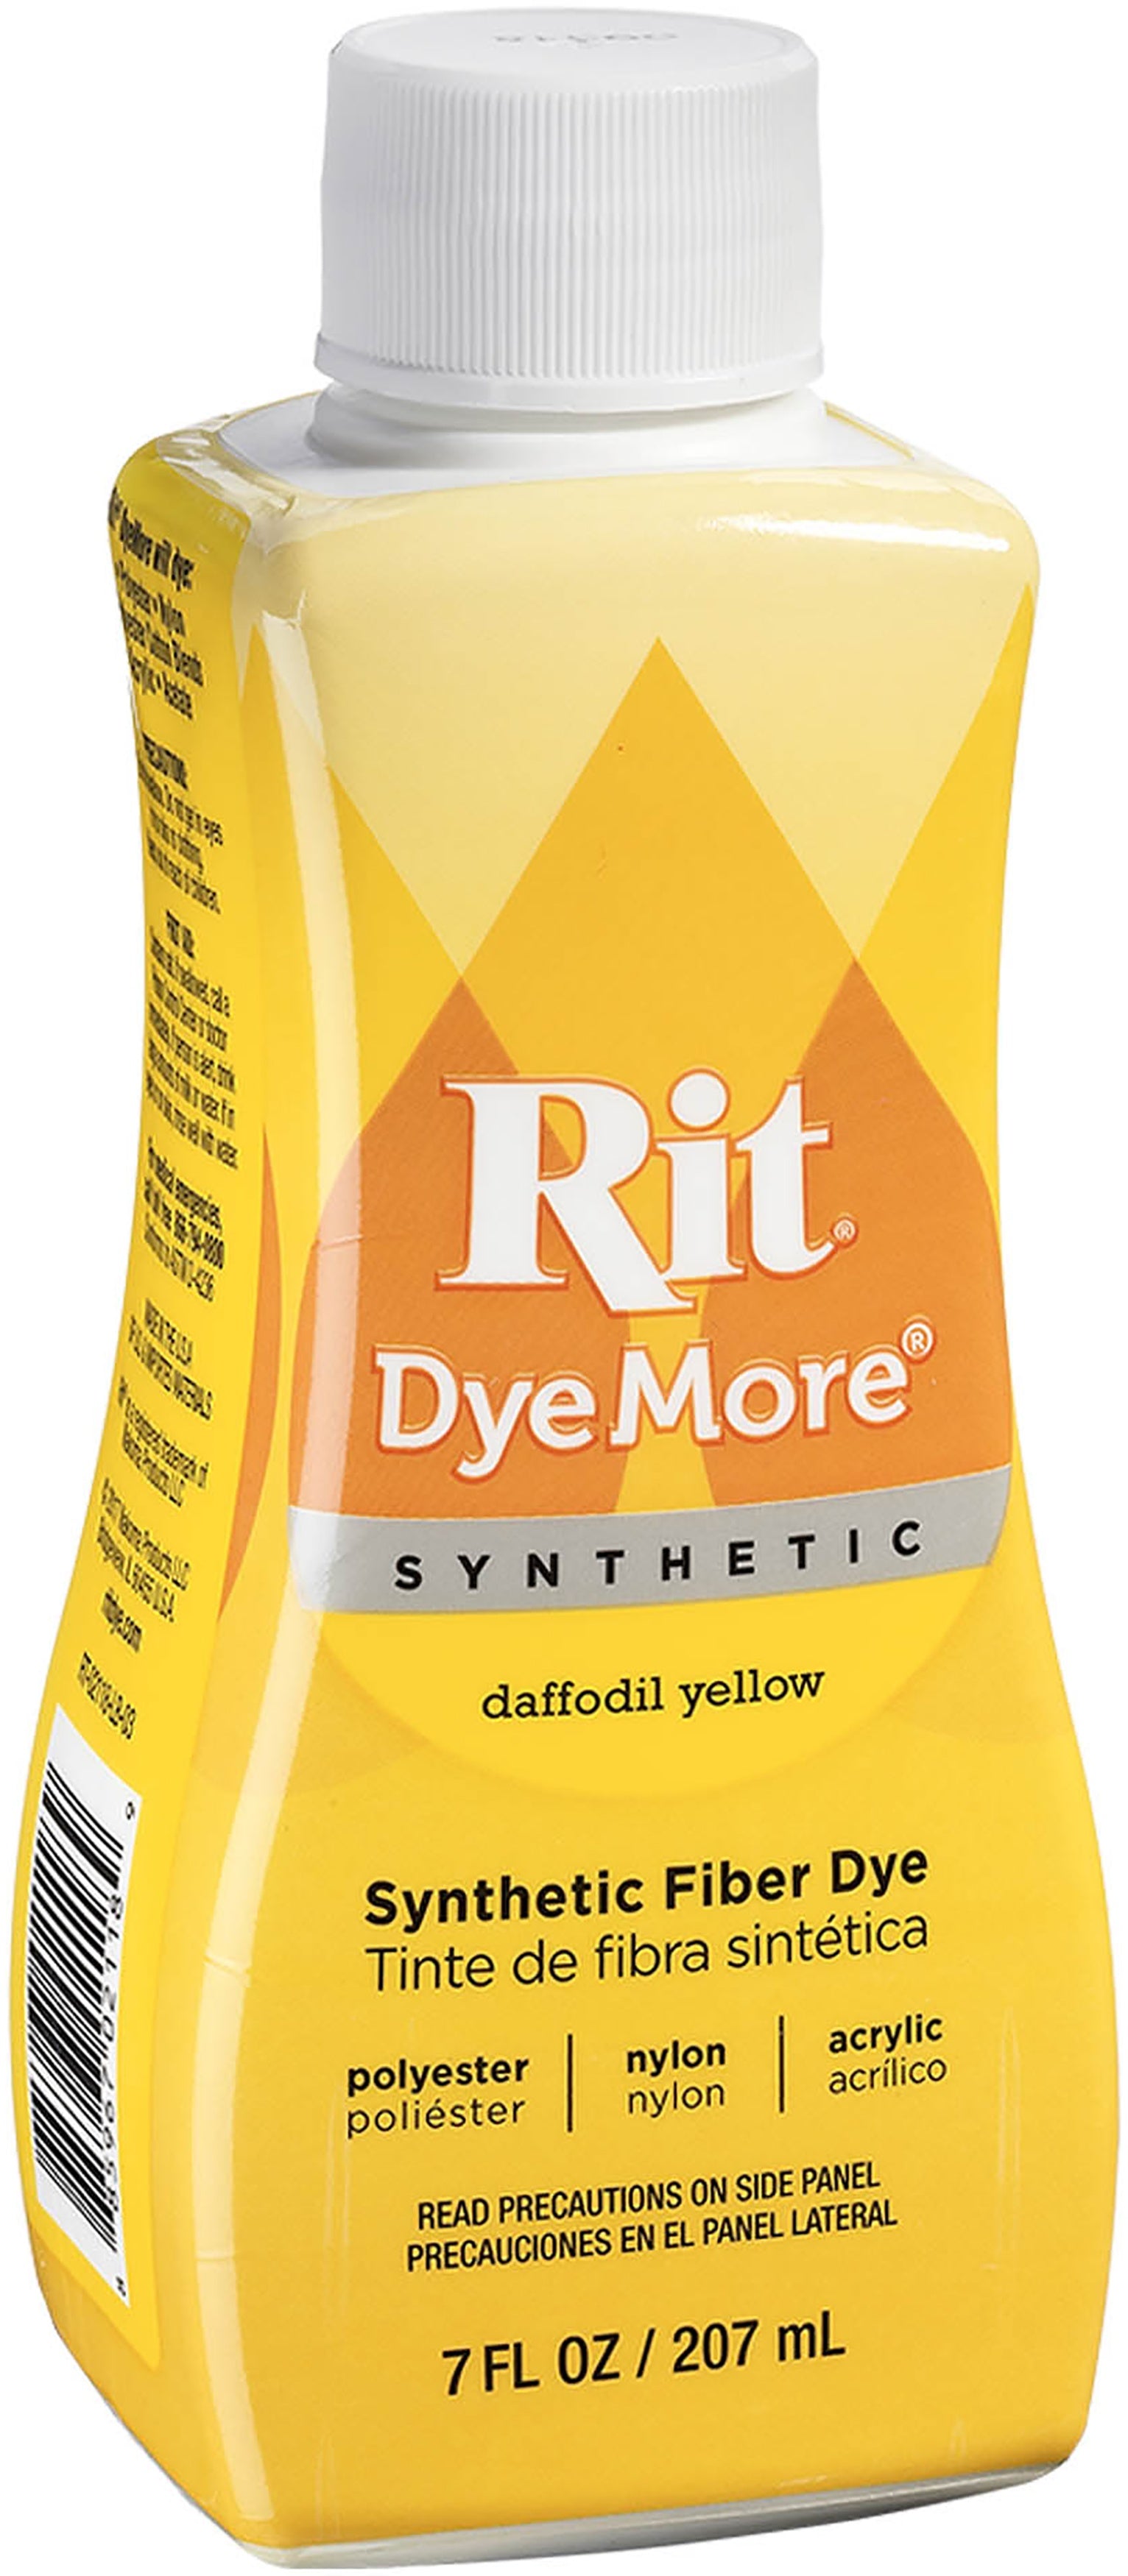 RIT DYE MORE SYNTHETIC 7 OZ Racing Red